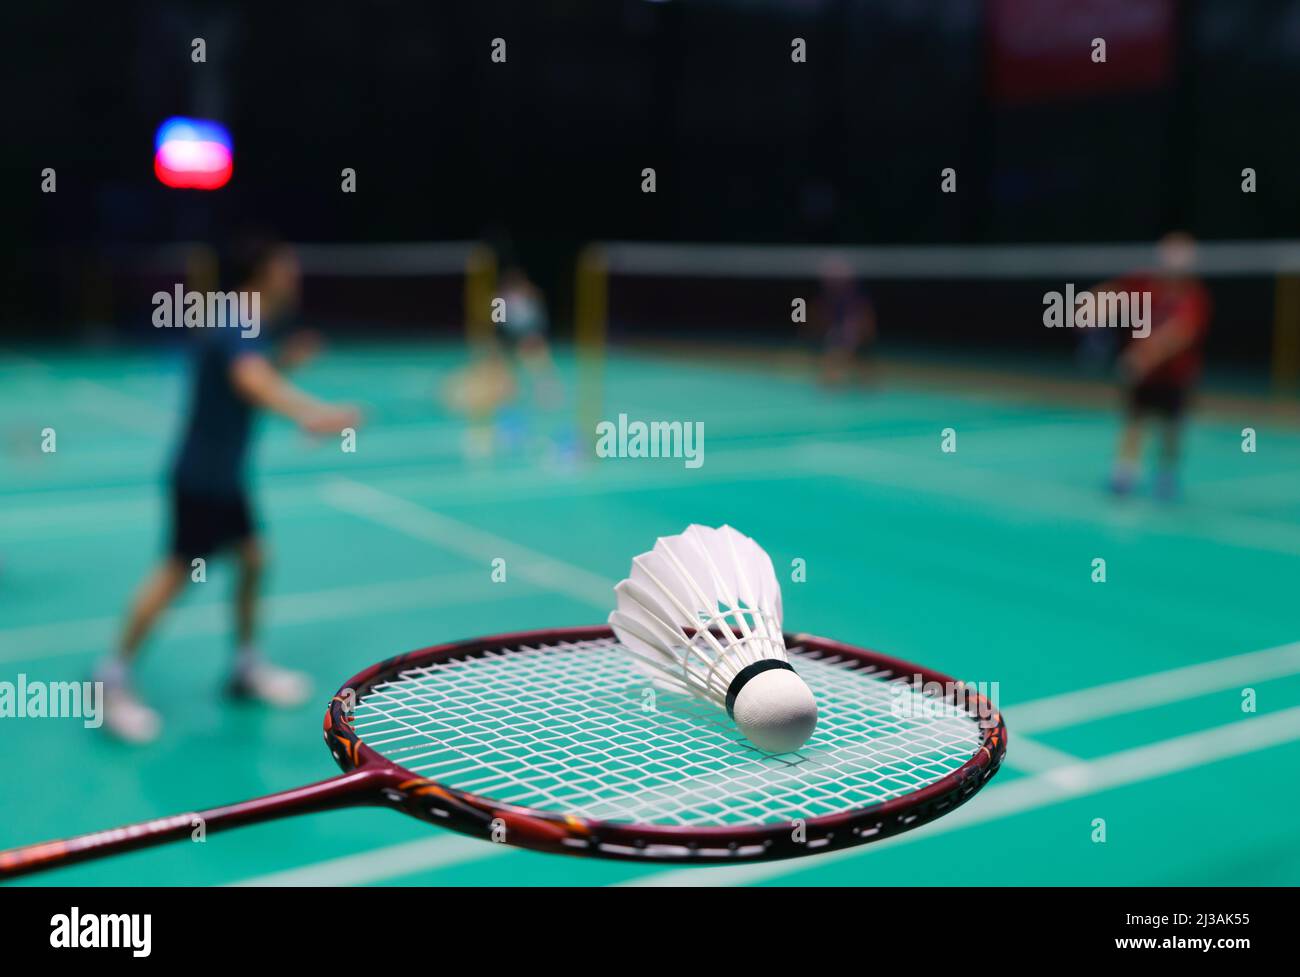 shuttlecock on green badminton playing court with player in background Stock Photo